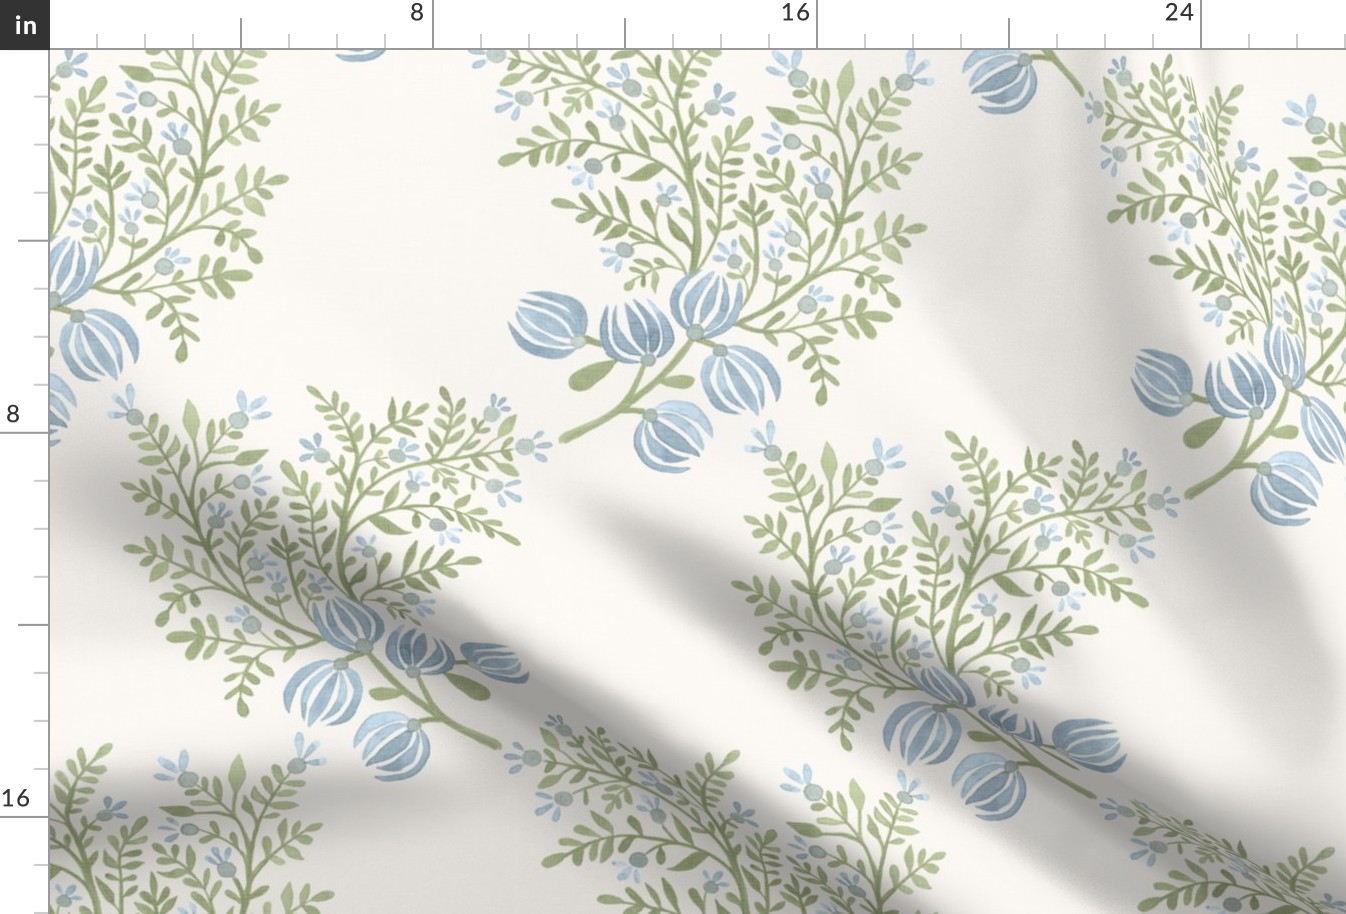 LIGHT OLIVE AND BLUES on Cream EMMA FLORAL TOSS 